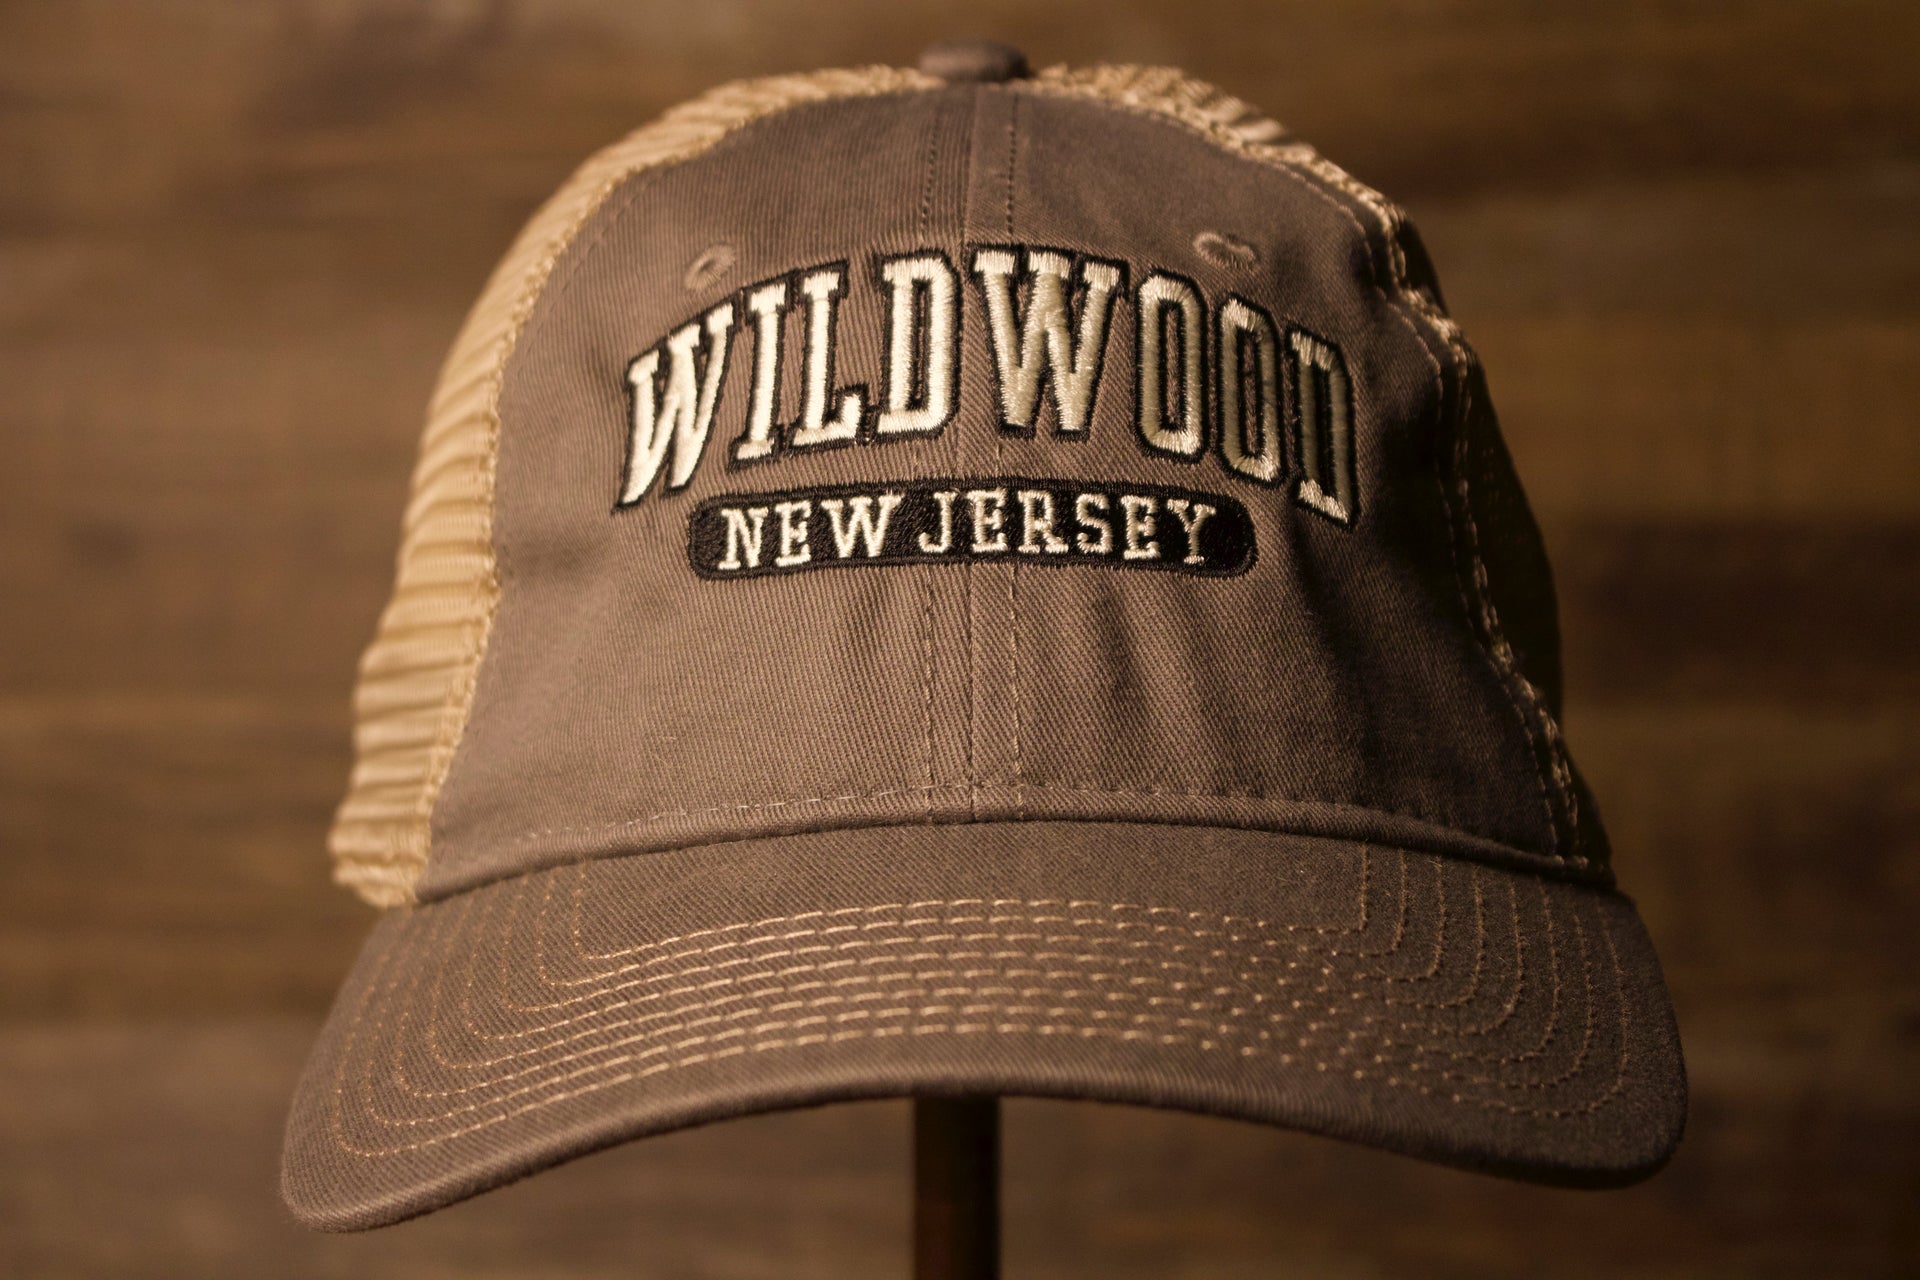 Wildwood New Jersey Charcoal / Khaki Mesh-Back Trucker Hat the front of this hat has Wildwood and new jersey with a charcoal color Wildwood New Jersey Charcoal / Khaki Mesh-Back Trucker Hat